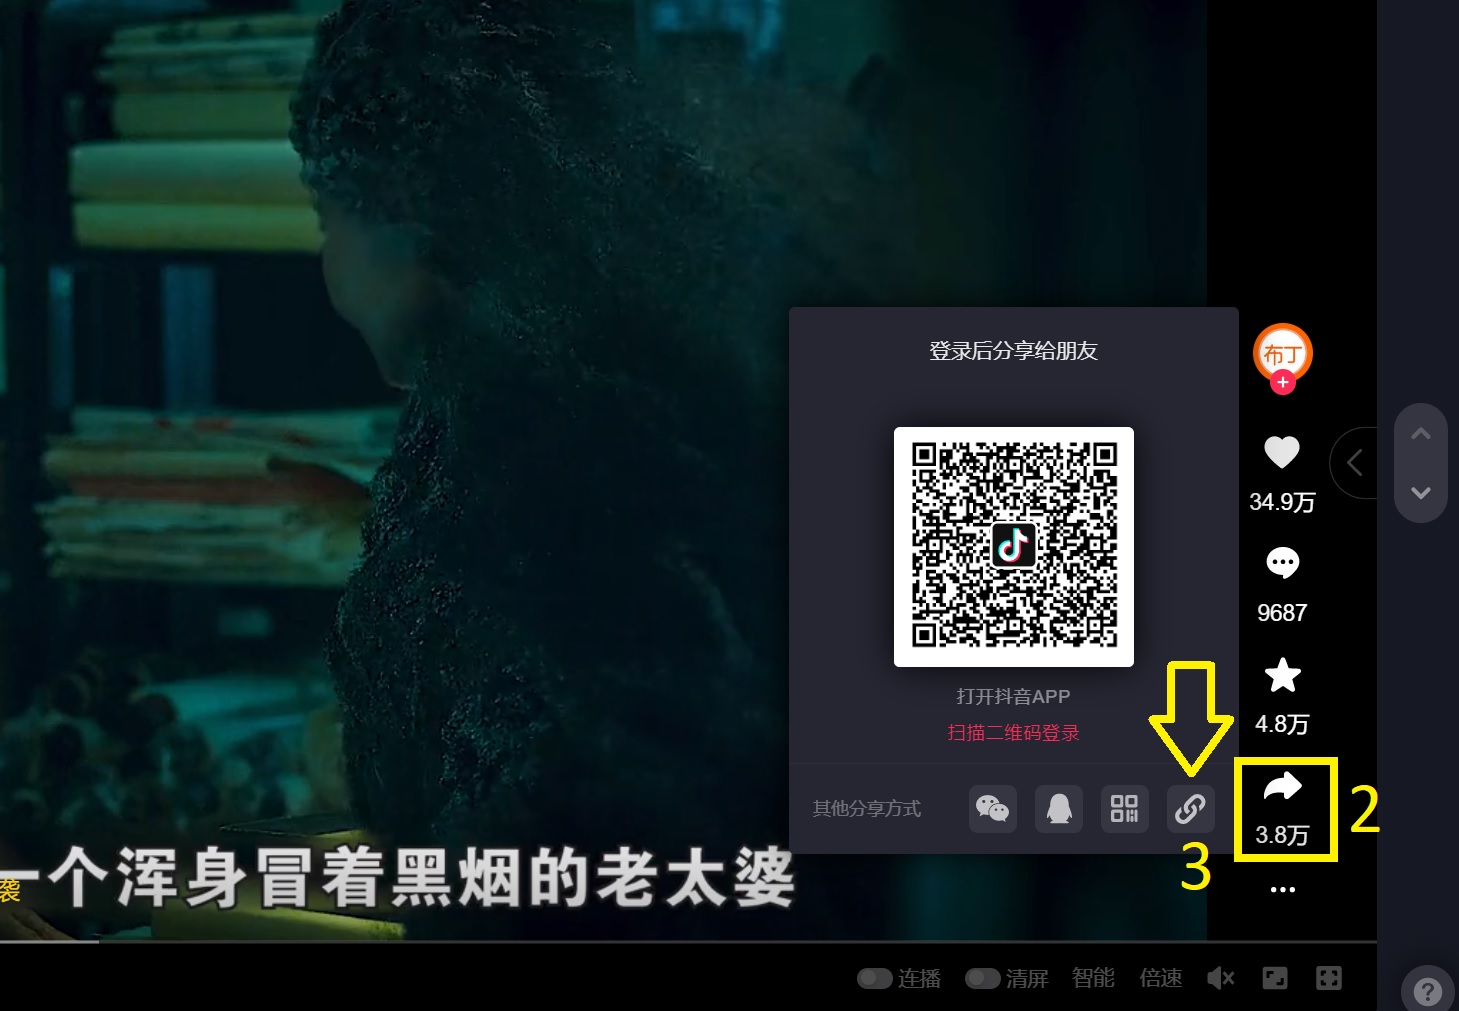 How to get Douyin video links on a computer